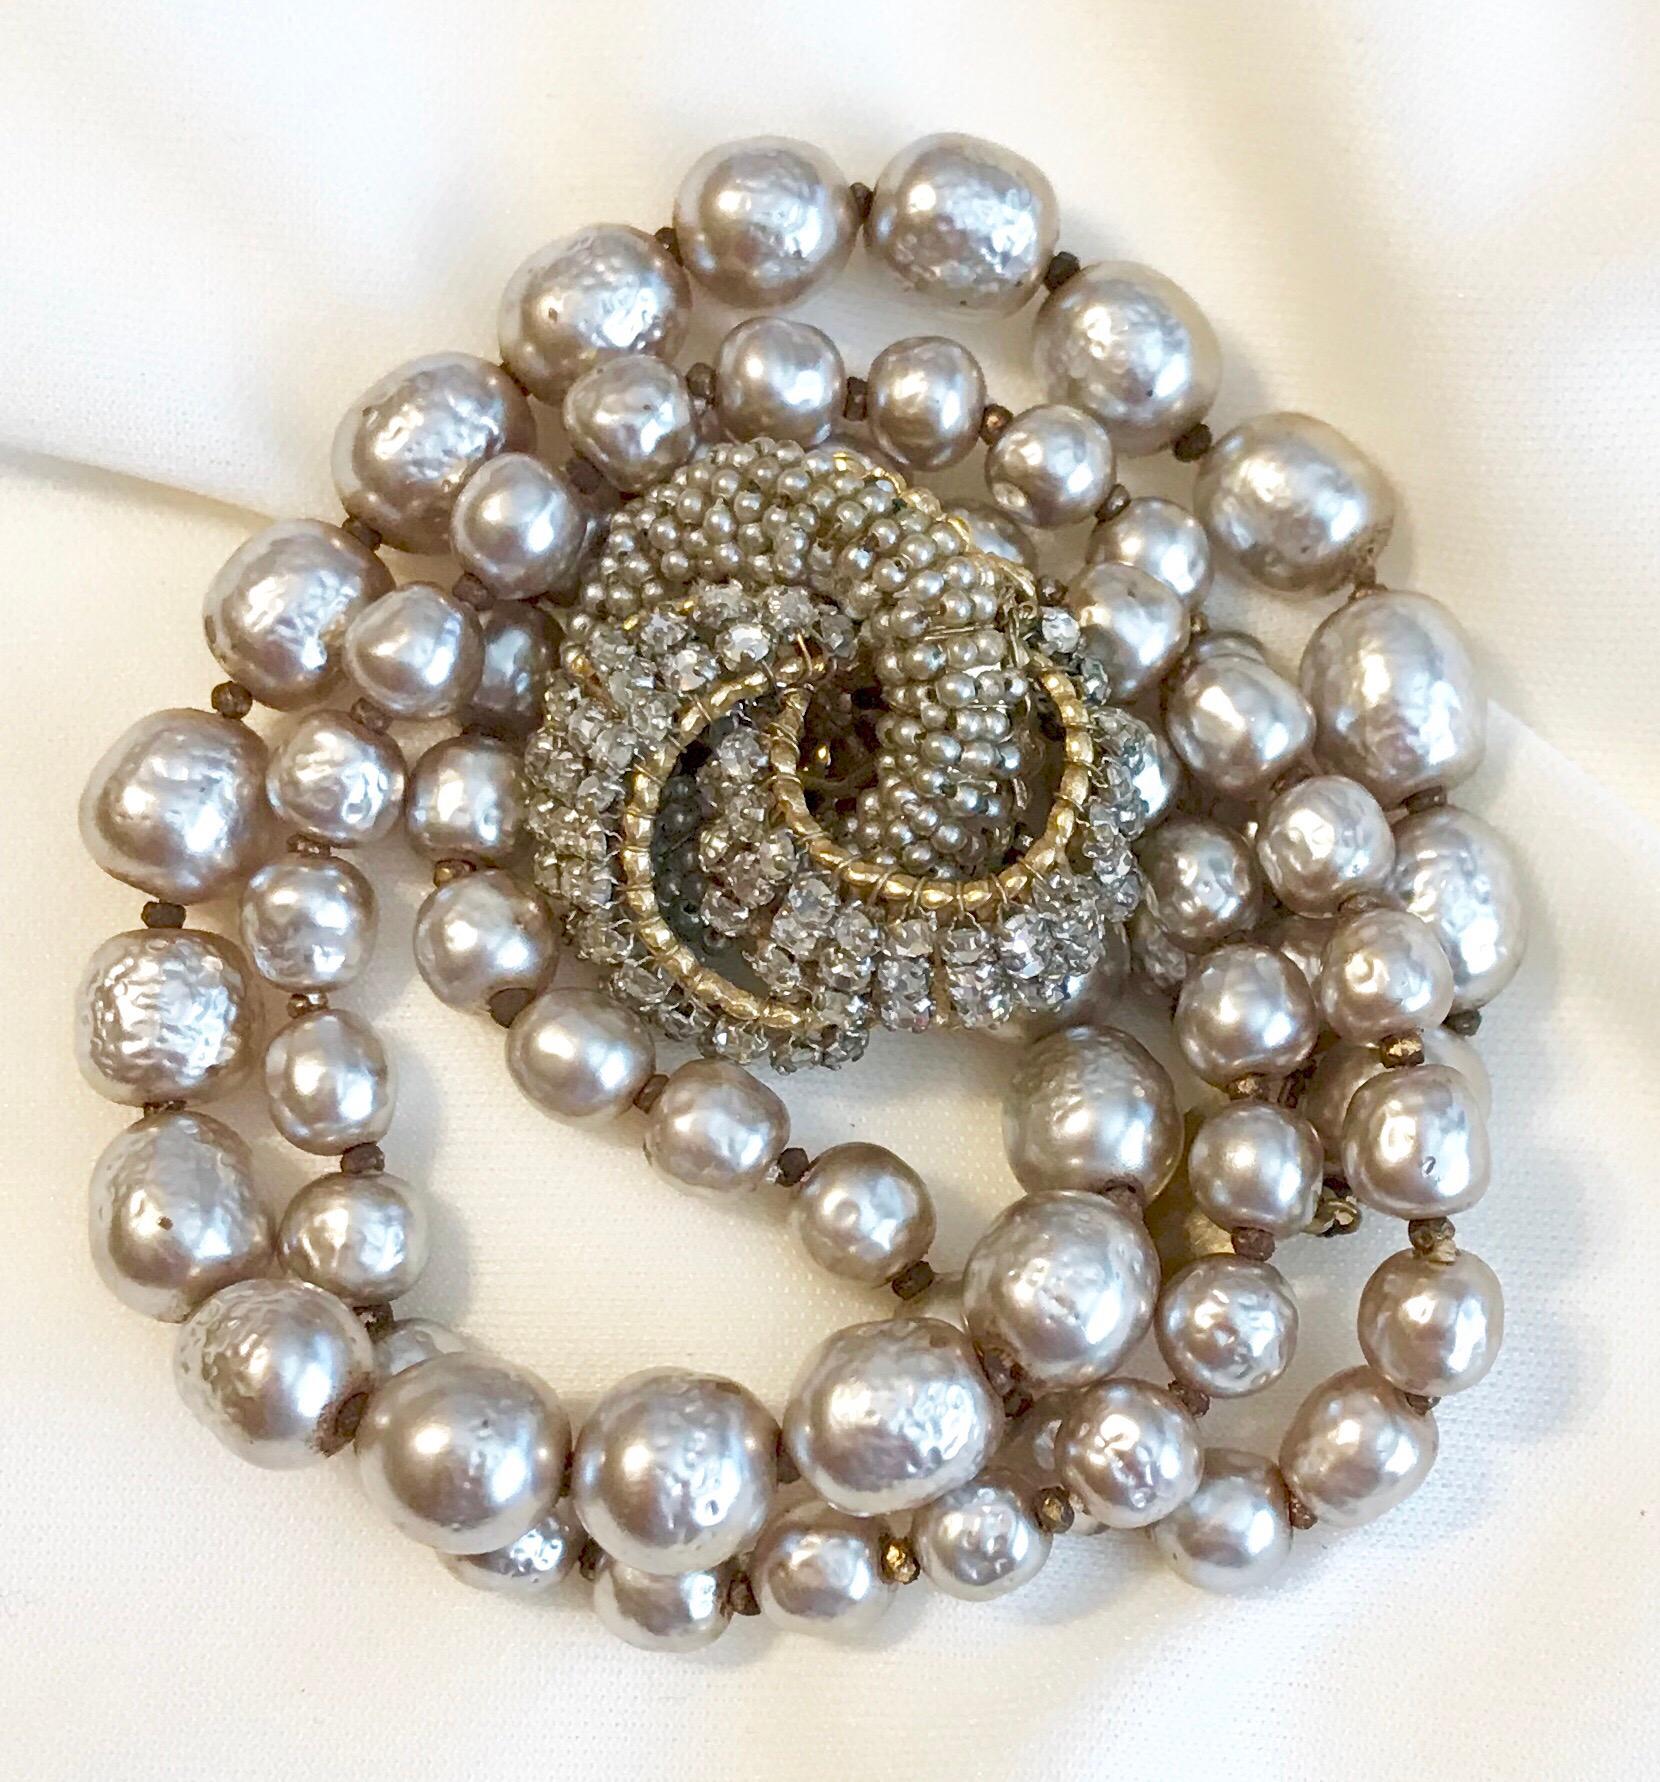 Baroque Revival Miriam Haskell Baroque Faux-Pearl and Rhinestone Bracelet For Sale